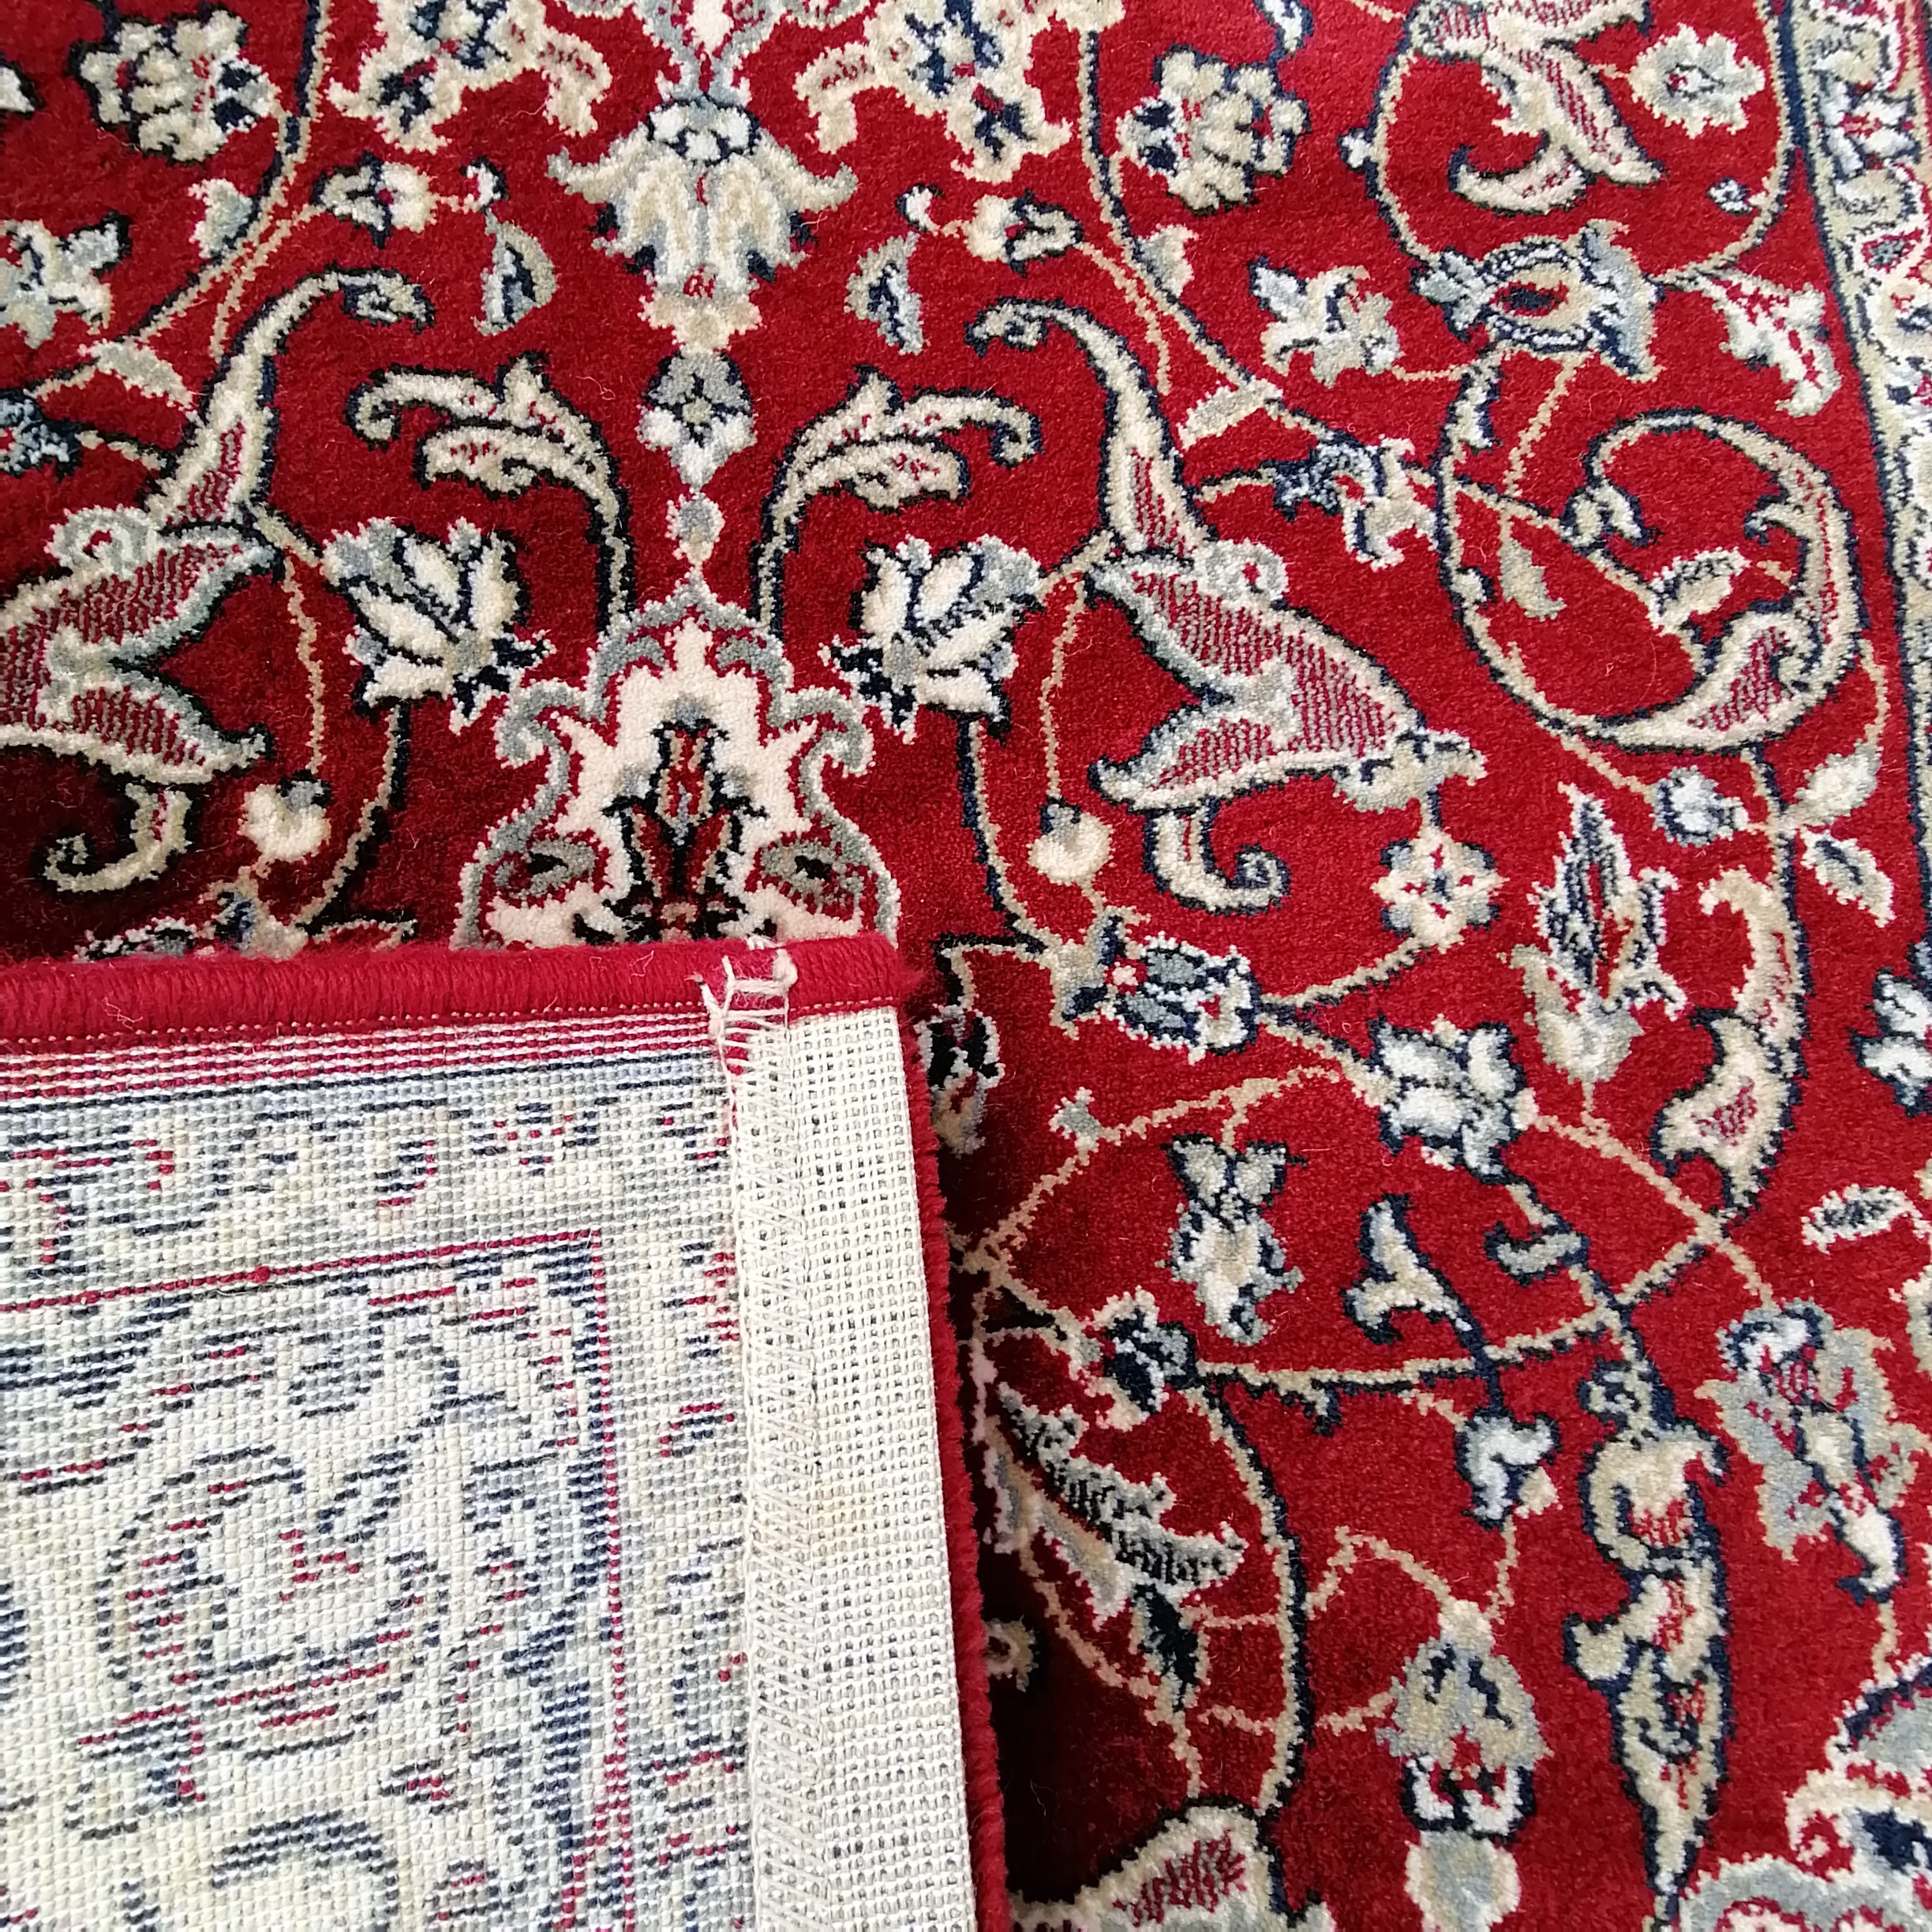 Small red grounded wool rug with cream detail to the border 158cm x 78cm - in good used condition - Image 2 of 2